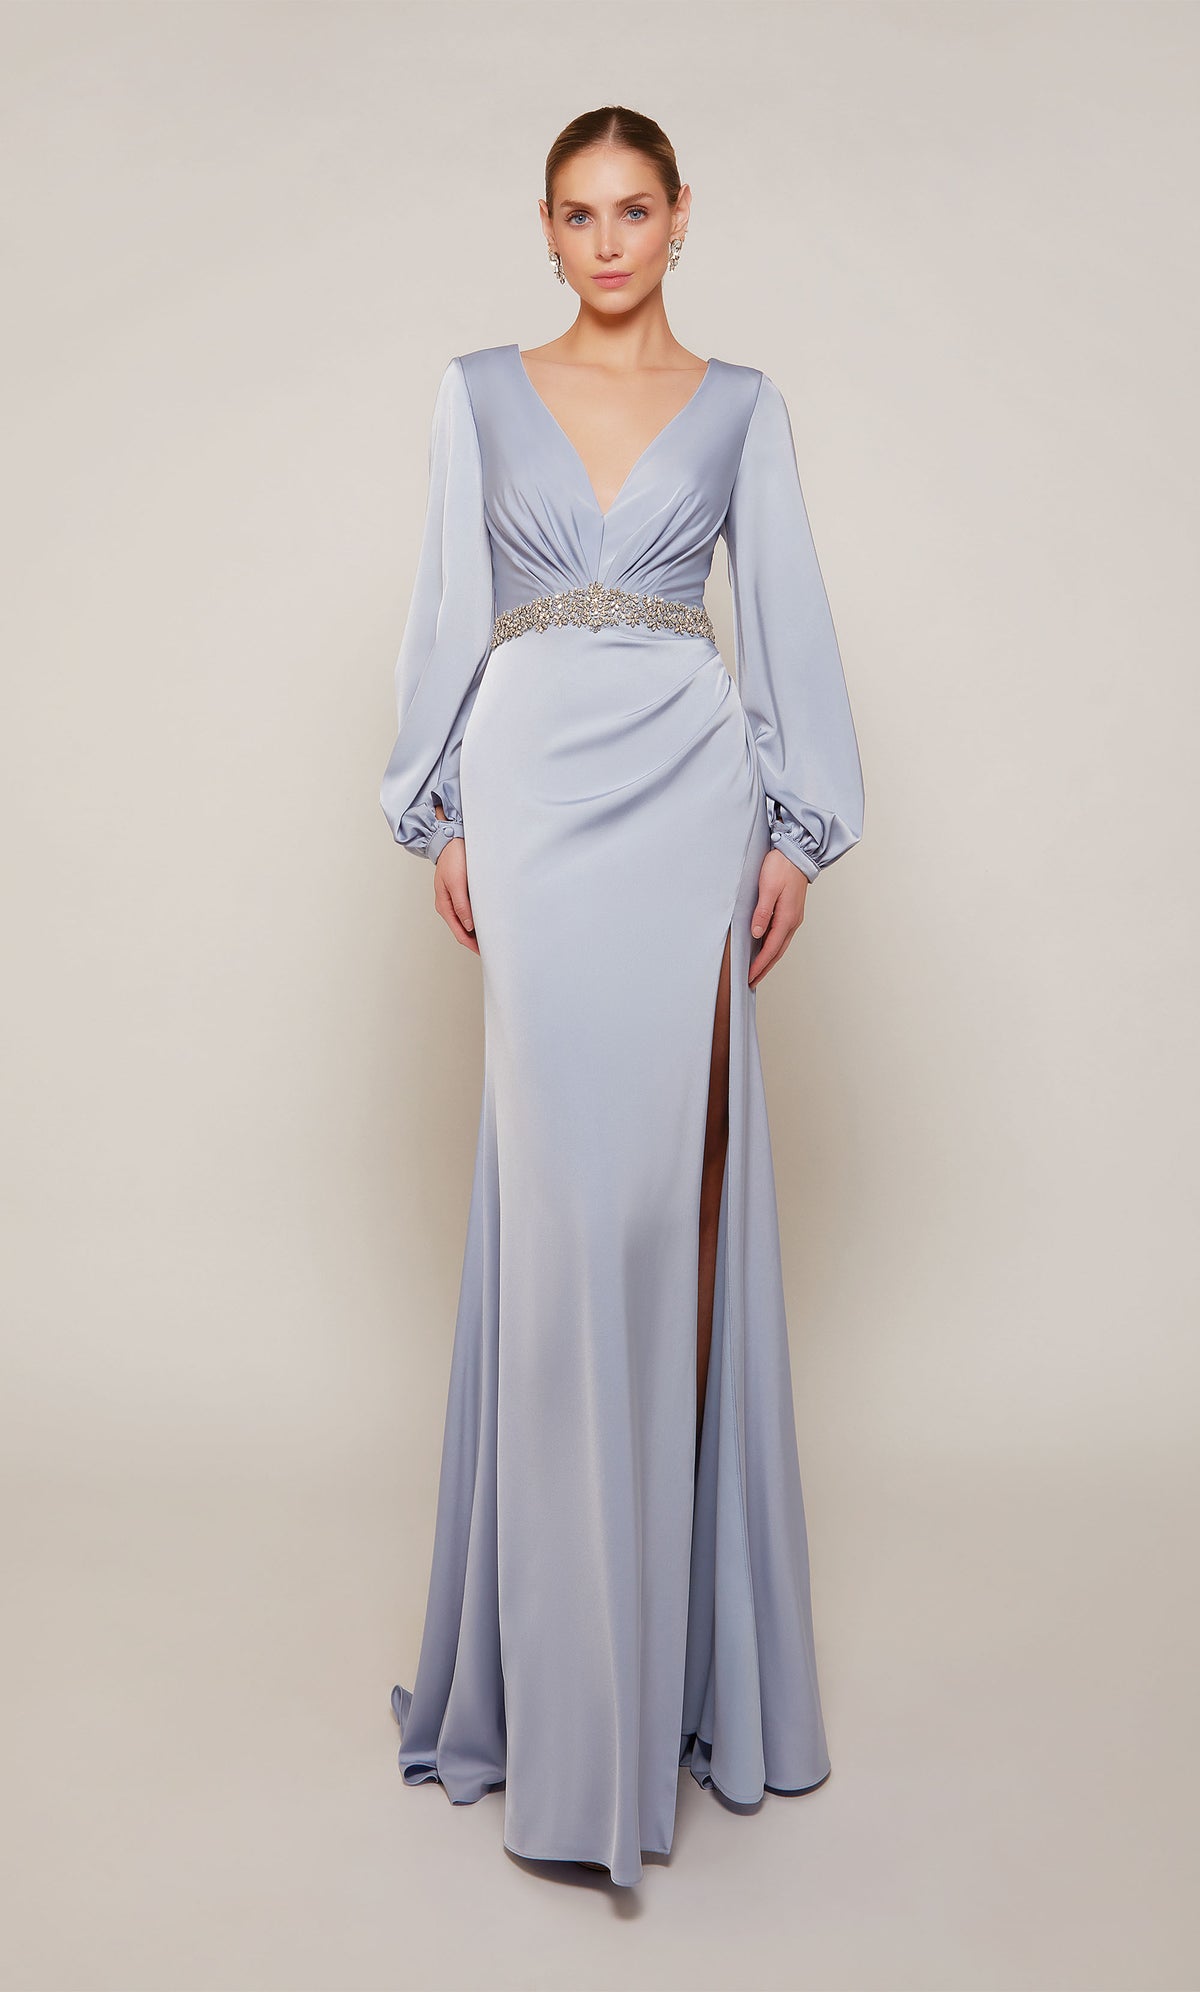 A chic, long sleeve, satin mother of the bride dress with a V-neckline, jeweled waistline, and side slit in french blue.